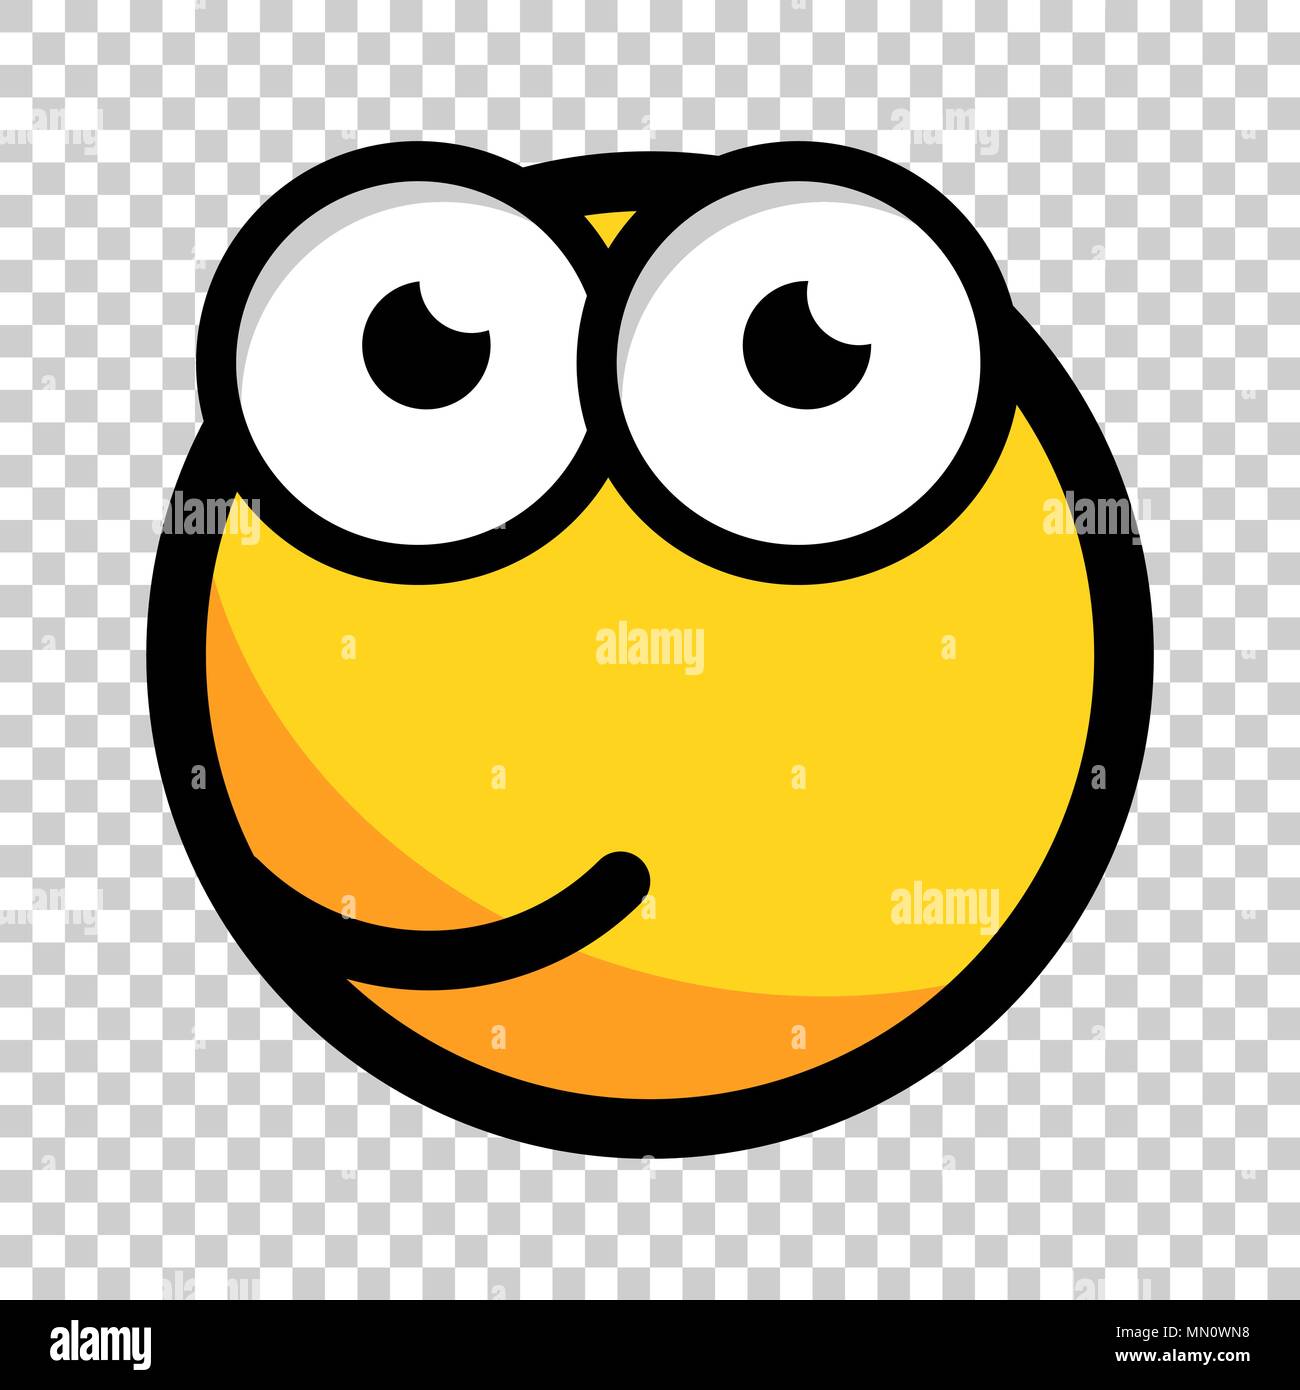 Cartoon face icon in flat style. Smiley face illustration on isolated transparent background. Comic emotion smiley business concept. Stock Vector